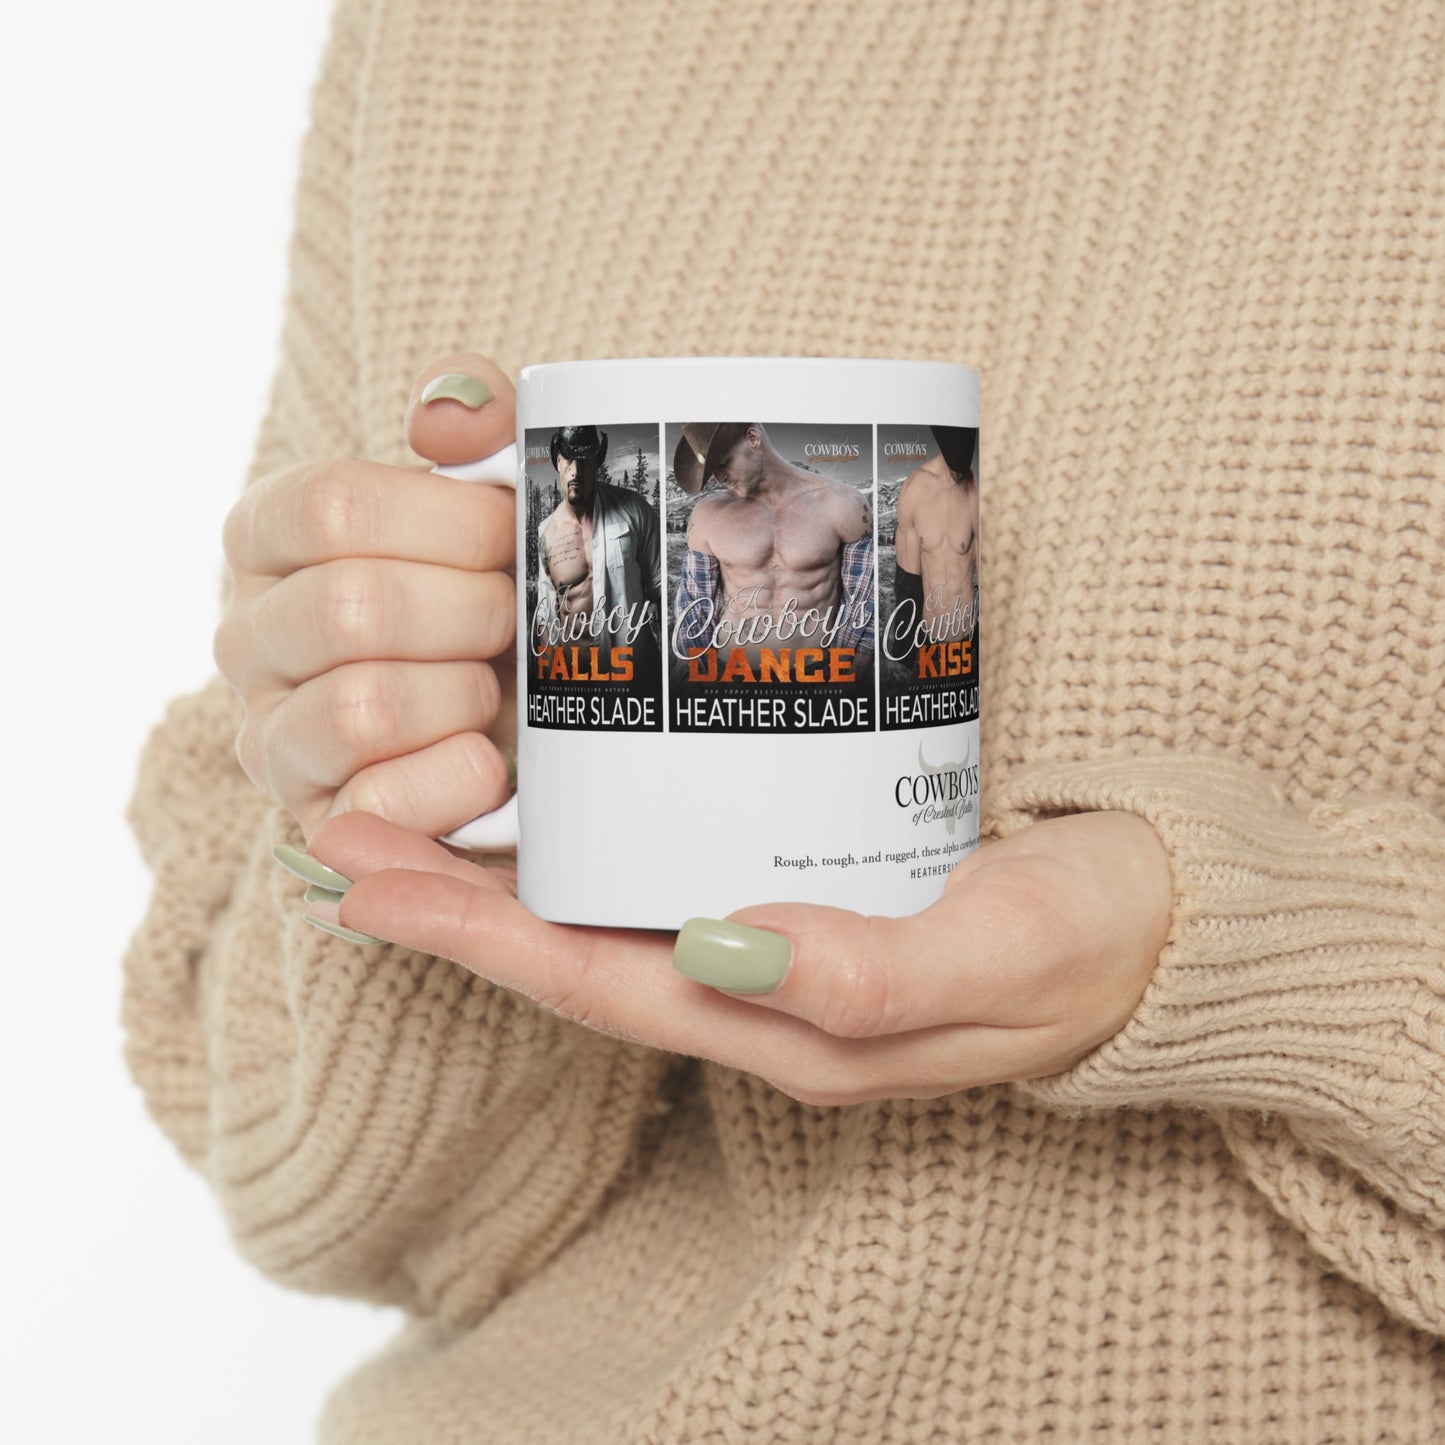 Cowboys of Crested Butte Covers Ceramic Coffee Mug